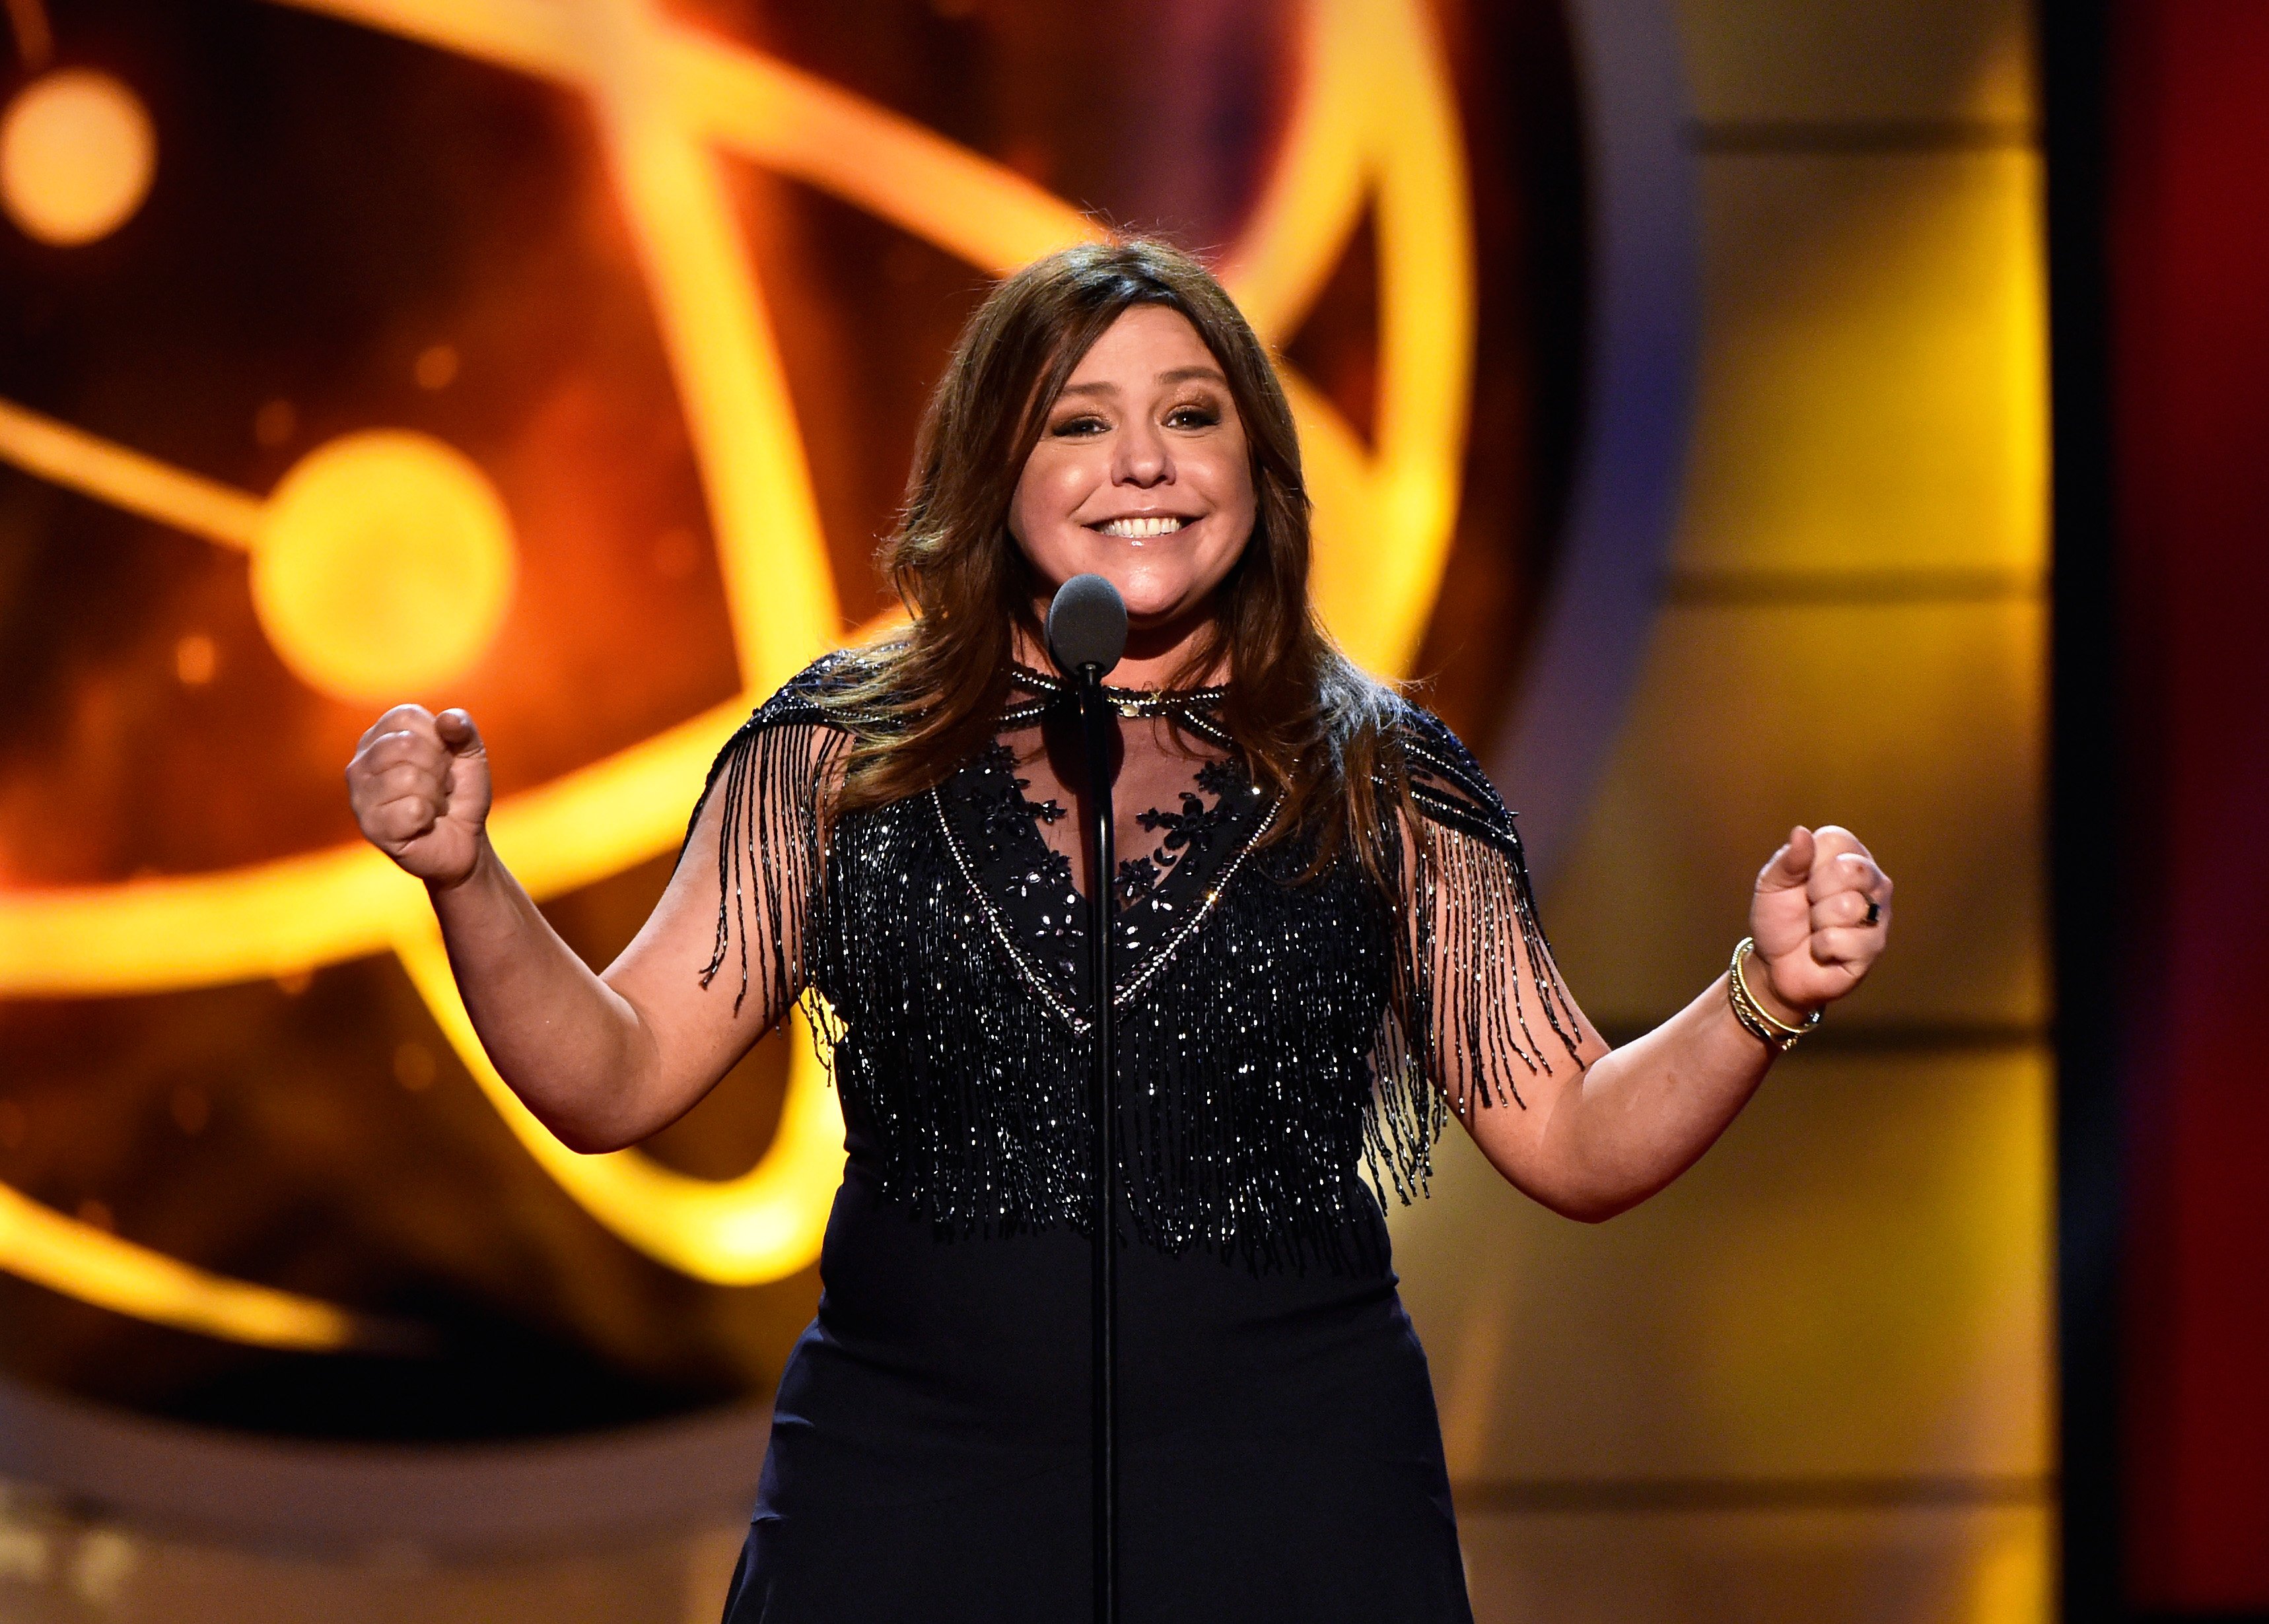 Rachael Ray onstage at the 46th Daytime Emmy Awards ceremony at Pasadena Civic Center, Pasadena, California, on May 05, 2019. | Source: Getty Images